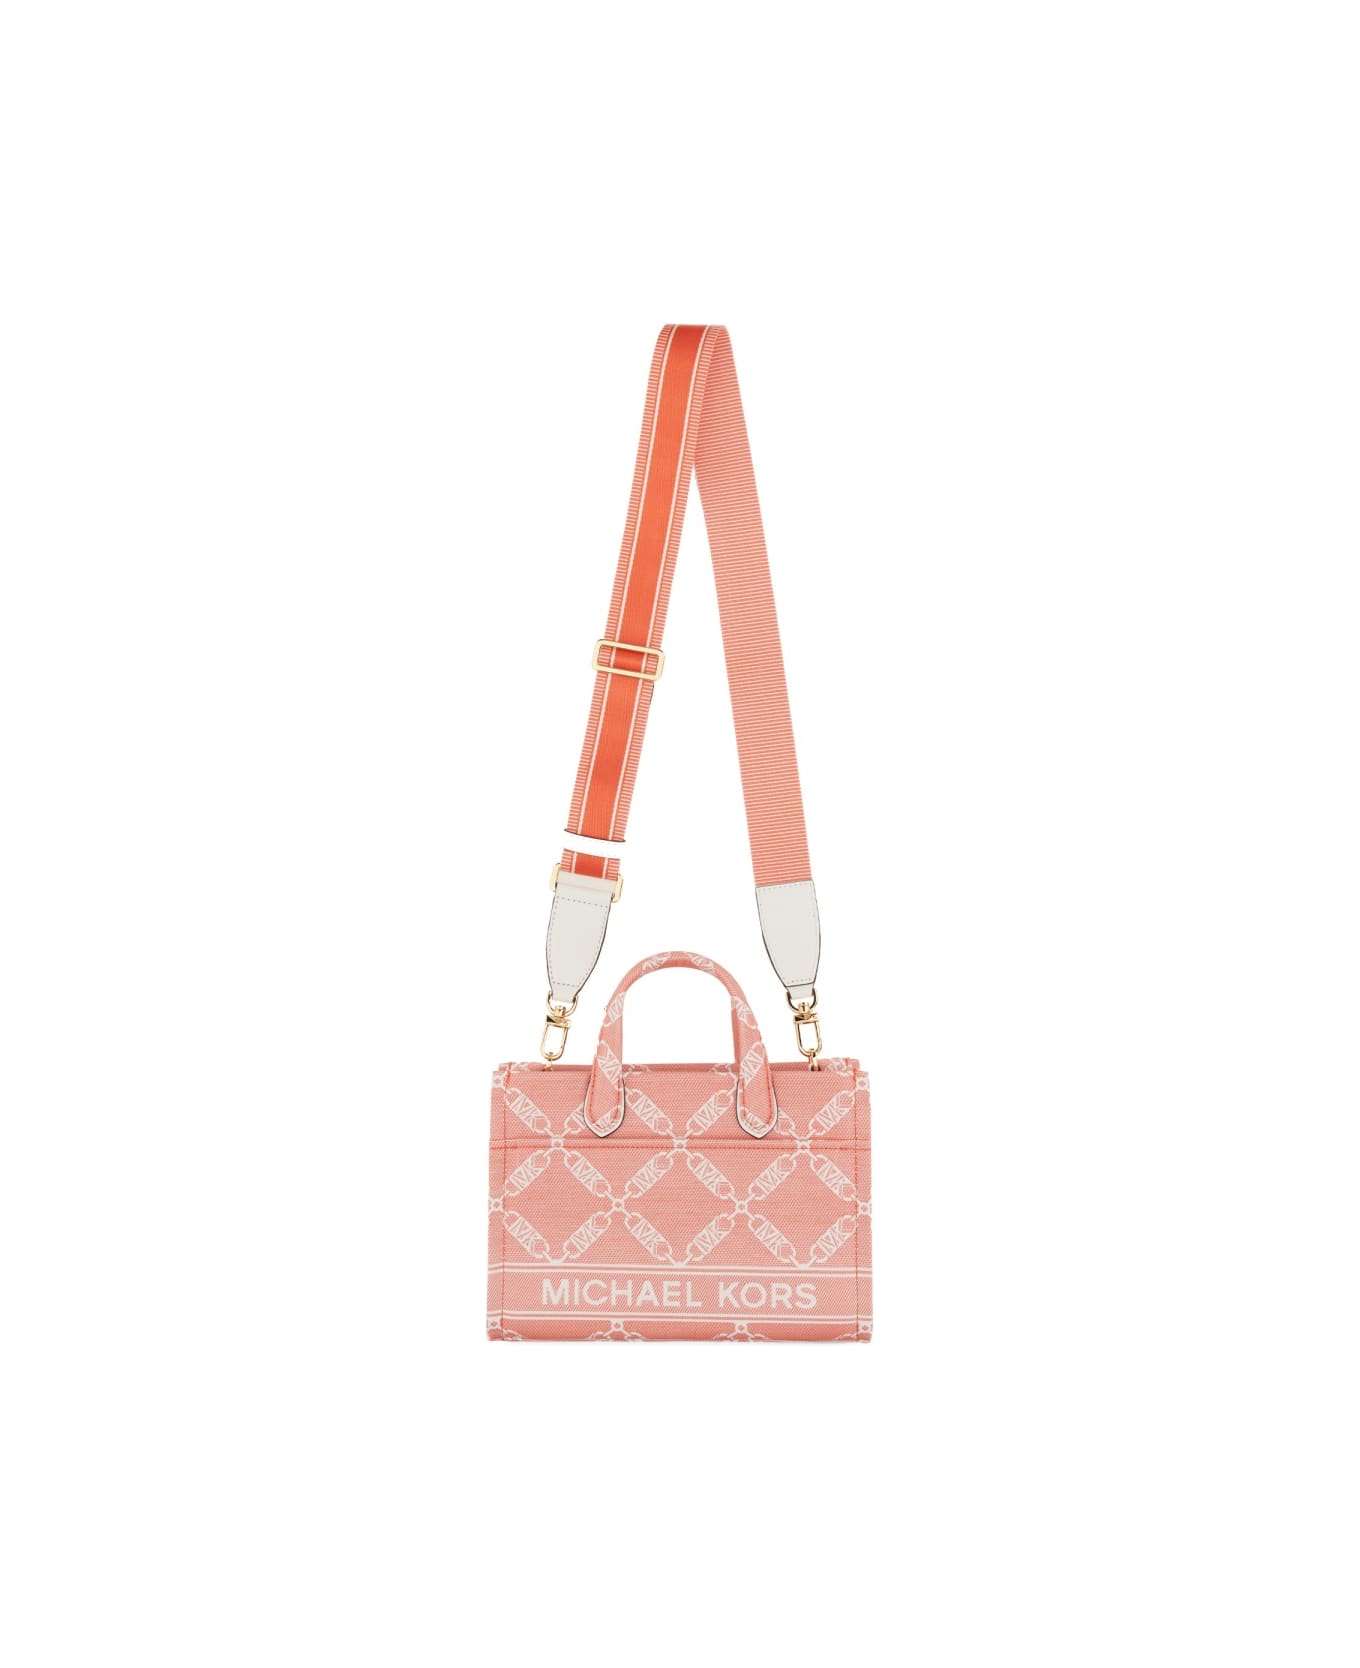 Michael Kors Gigi Small Tote Bag - Spiced coral トートバッグ